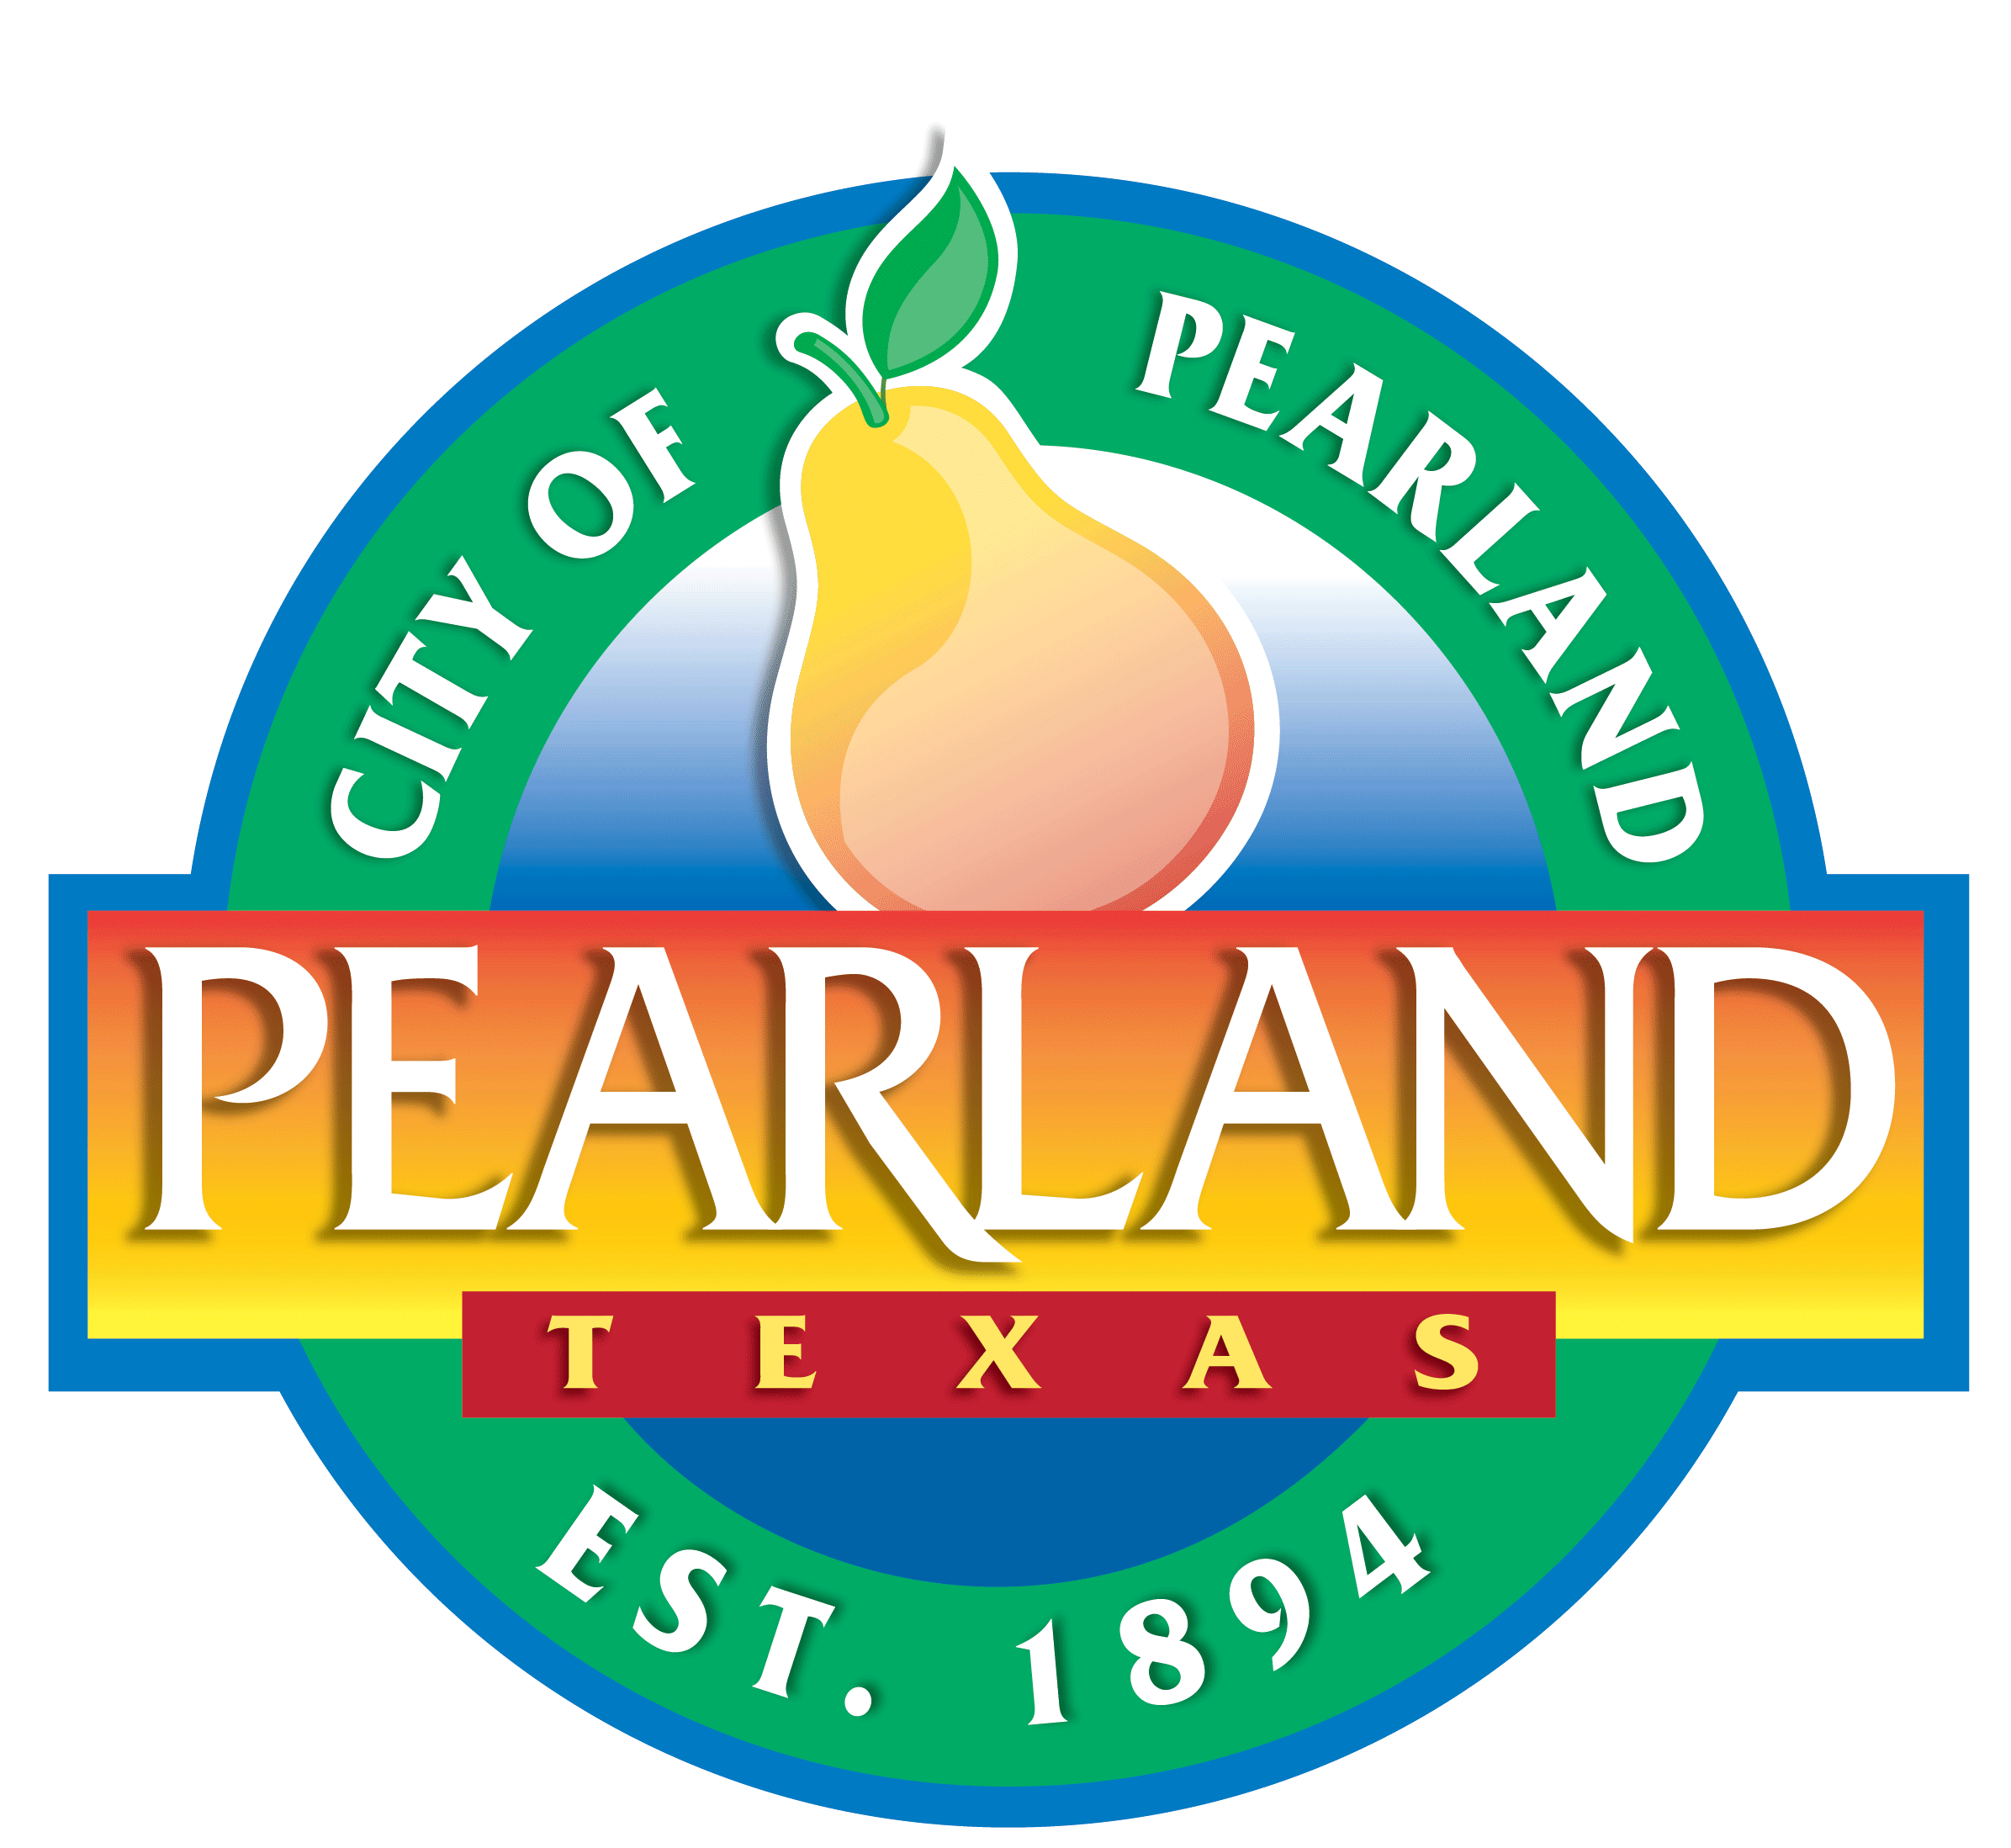 City of Pearland logo